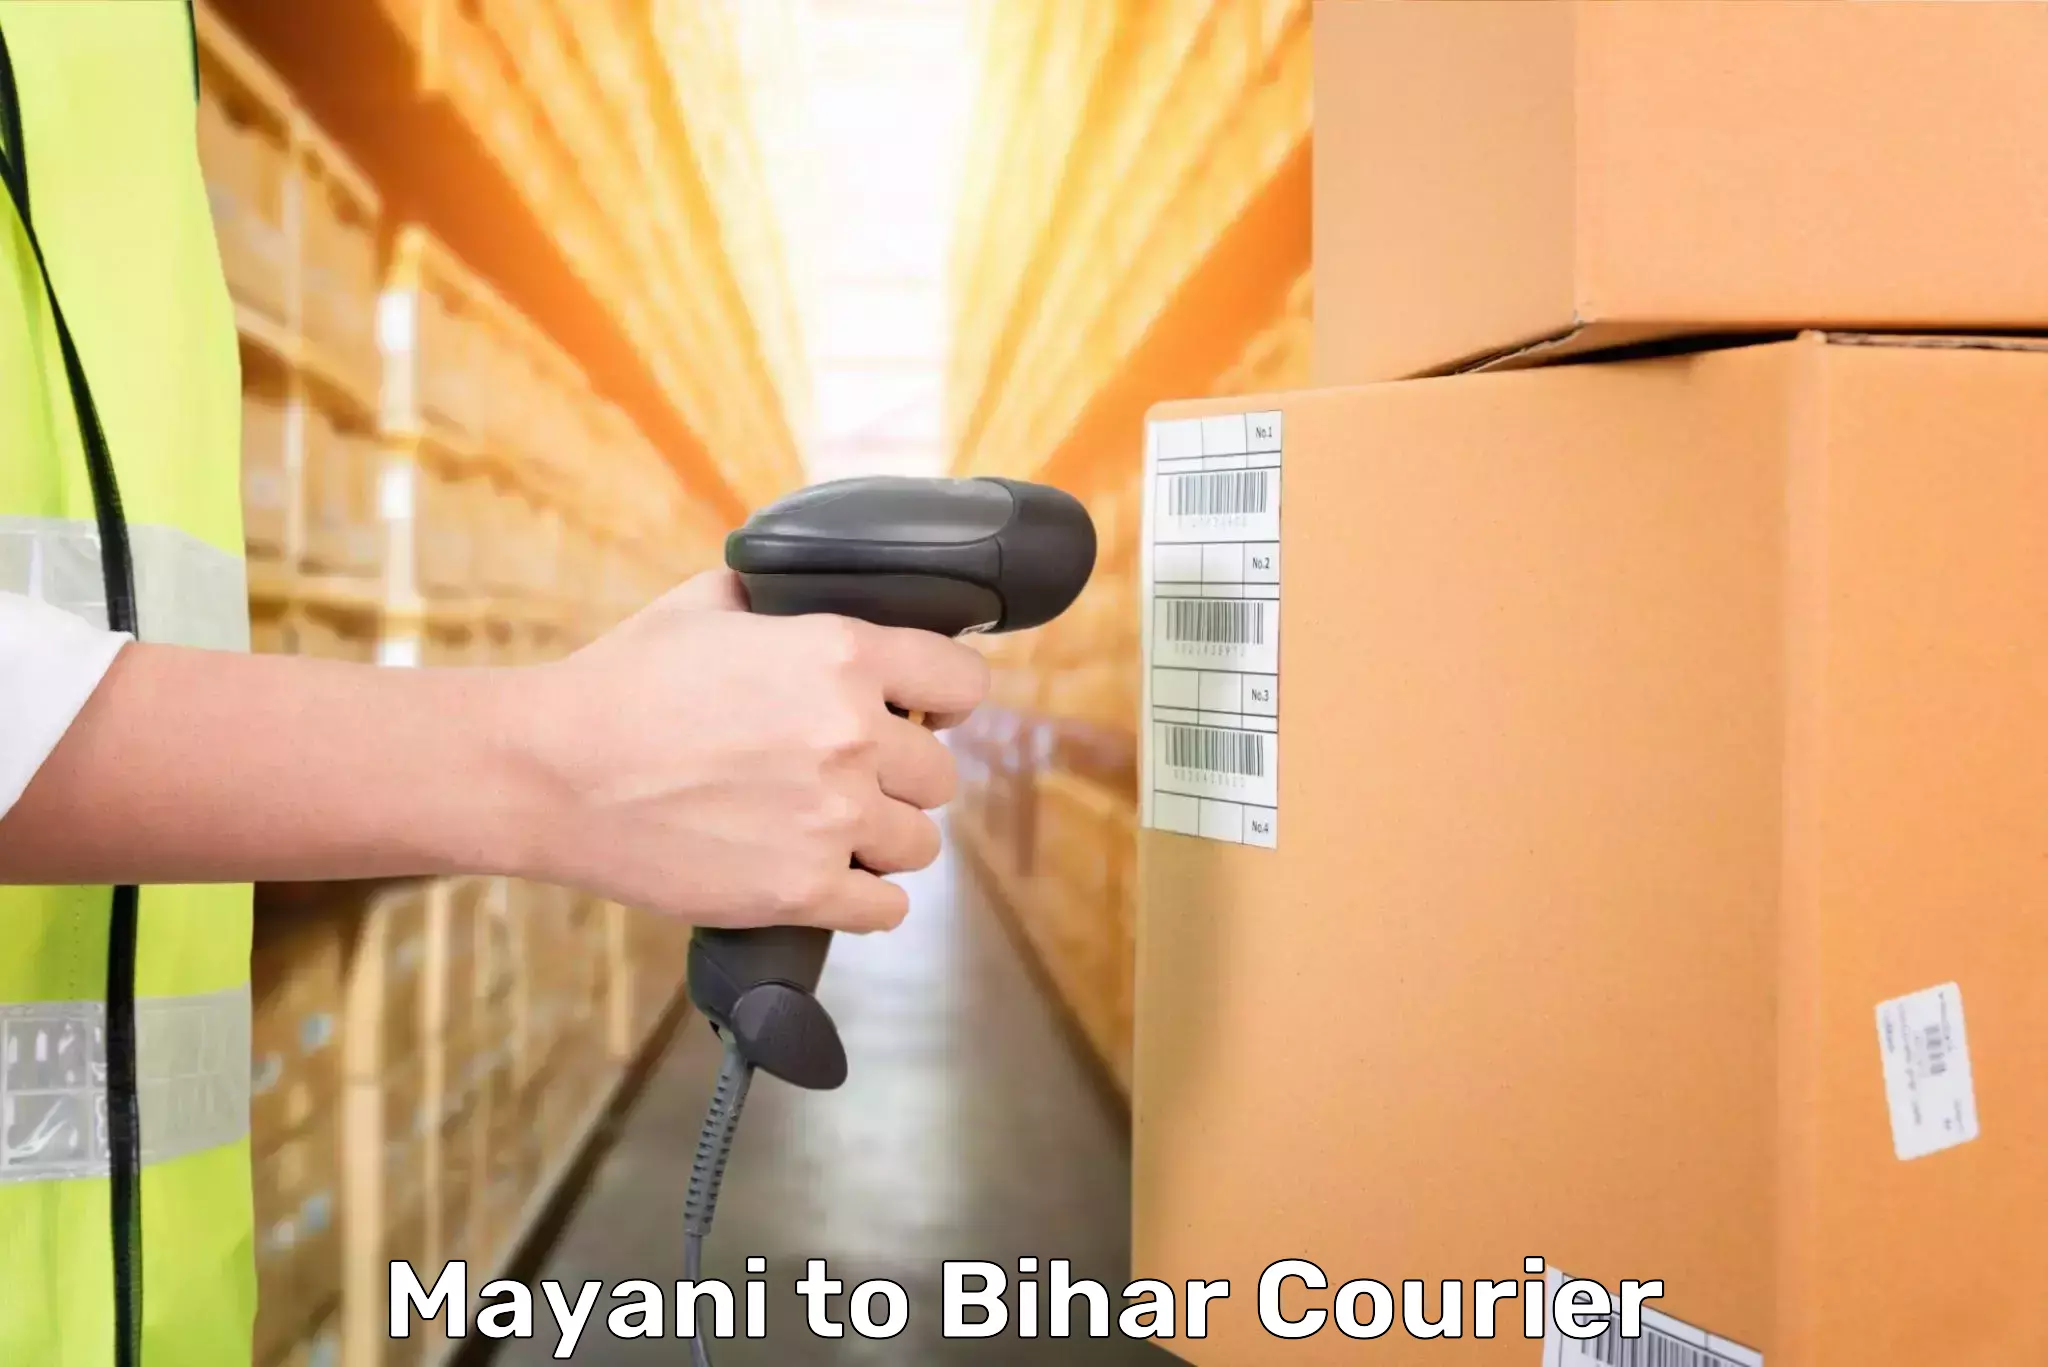 Express luggage delivery in Mayani to Aurangabad Bihar